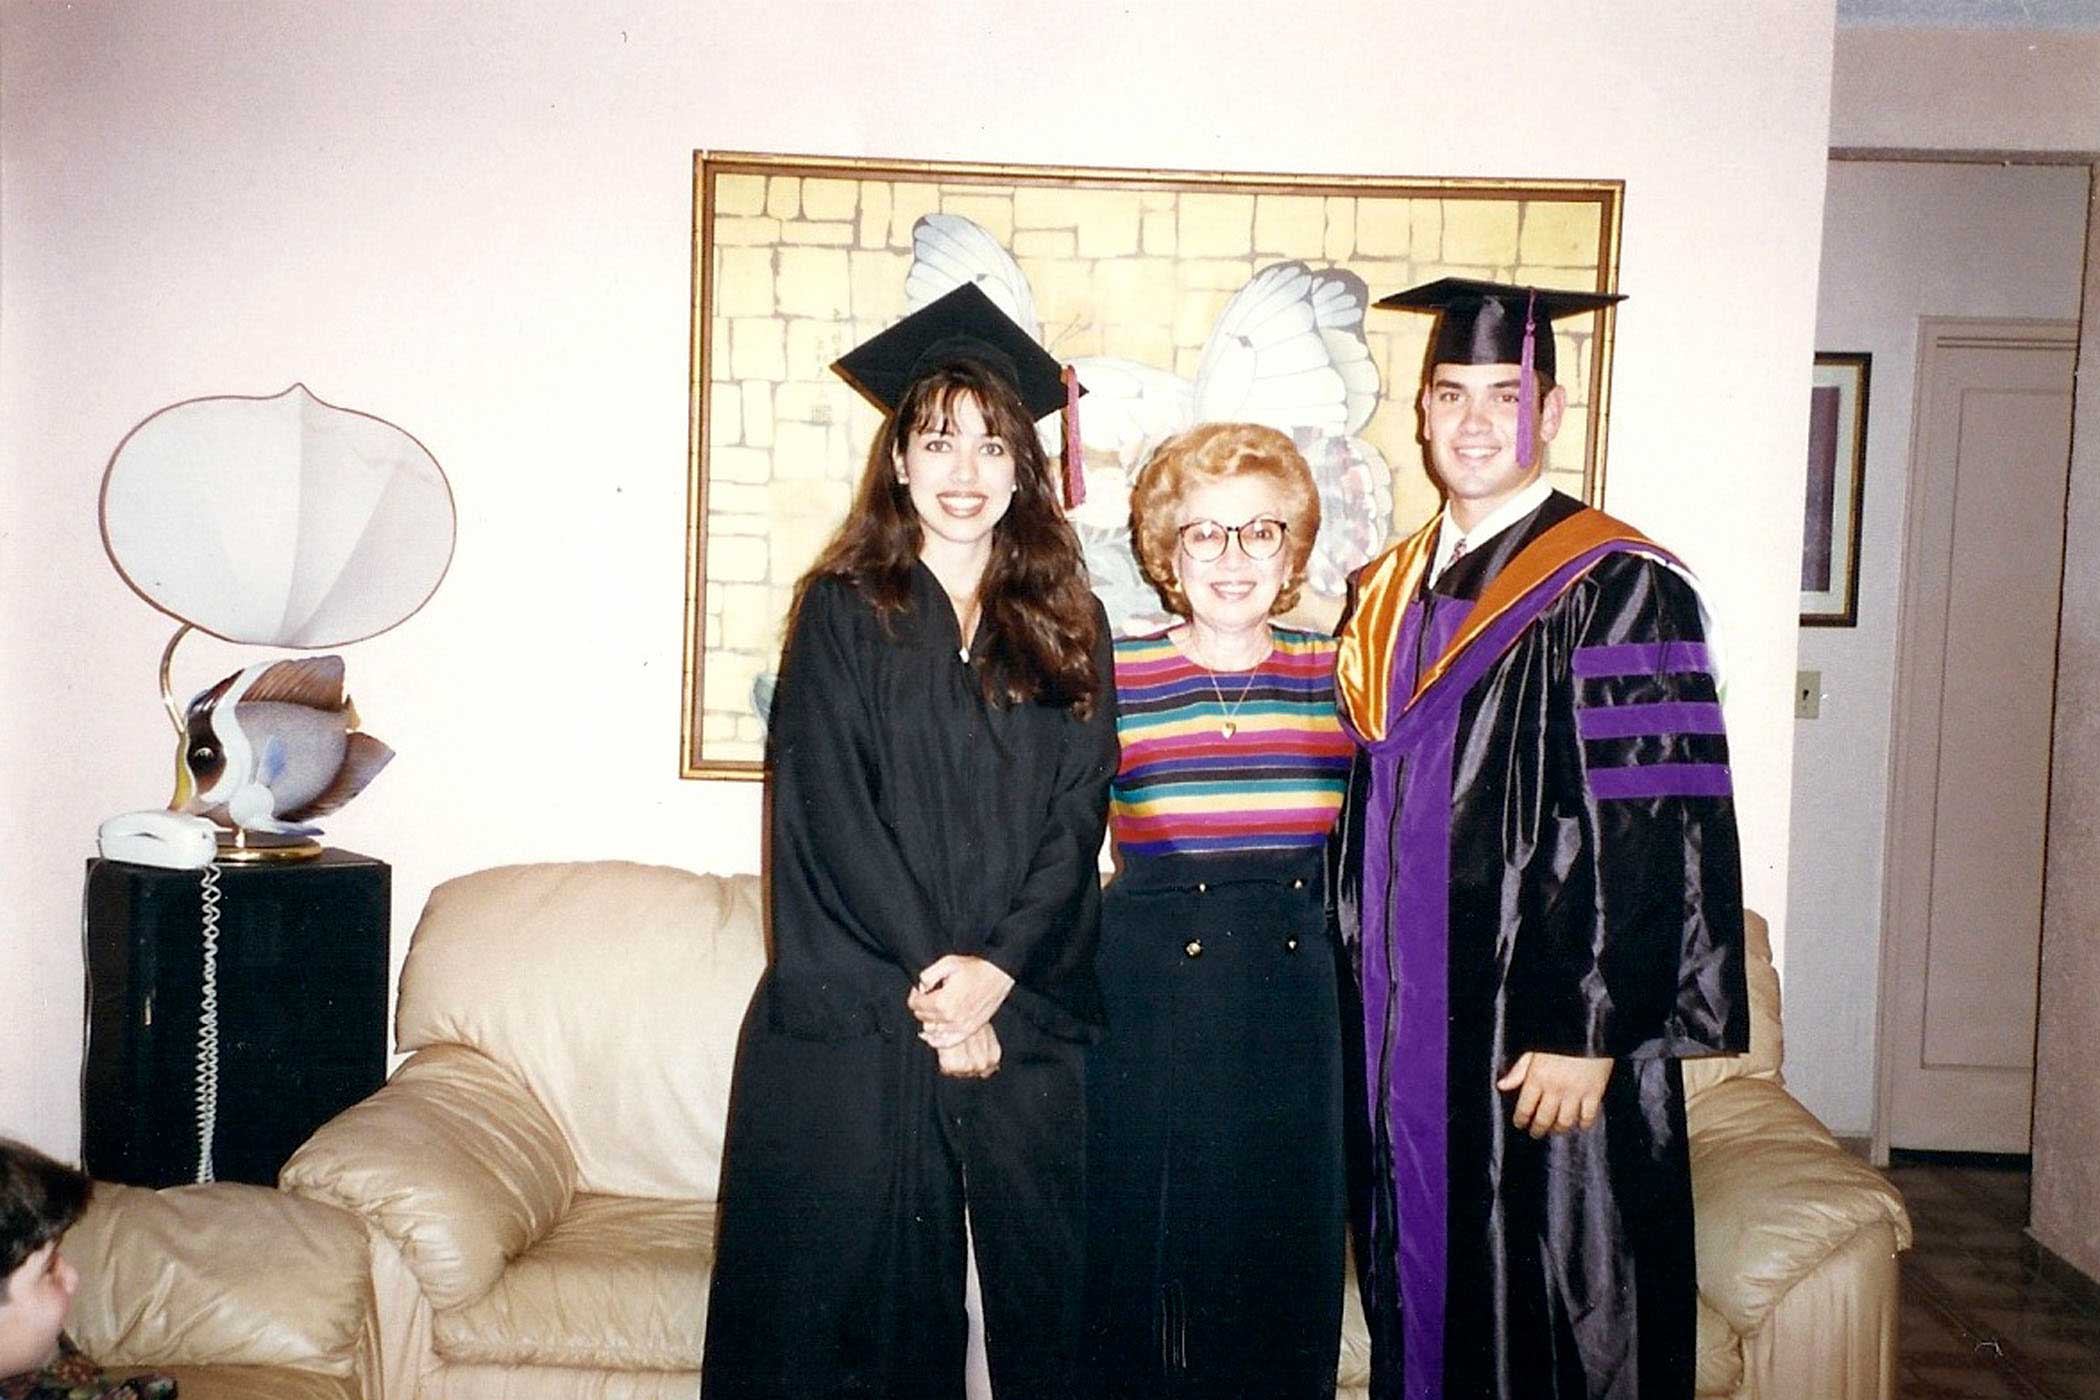 From right Marco Rubio with his mother and sister Veronica during his graduation from the University of Miami law school in 1996. Veronica graduated from Florida international university bachelor’s degree.